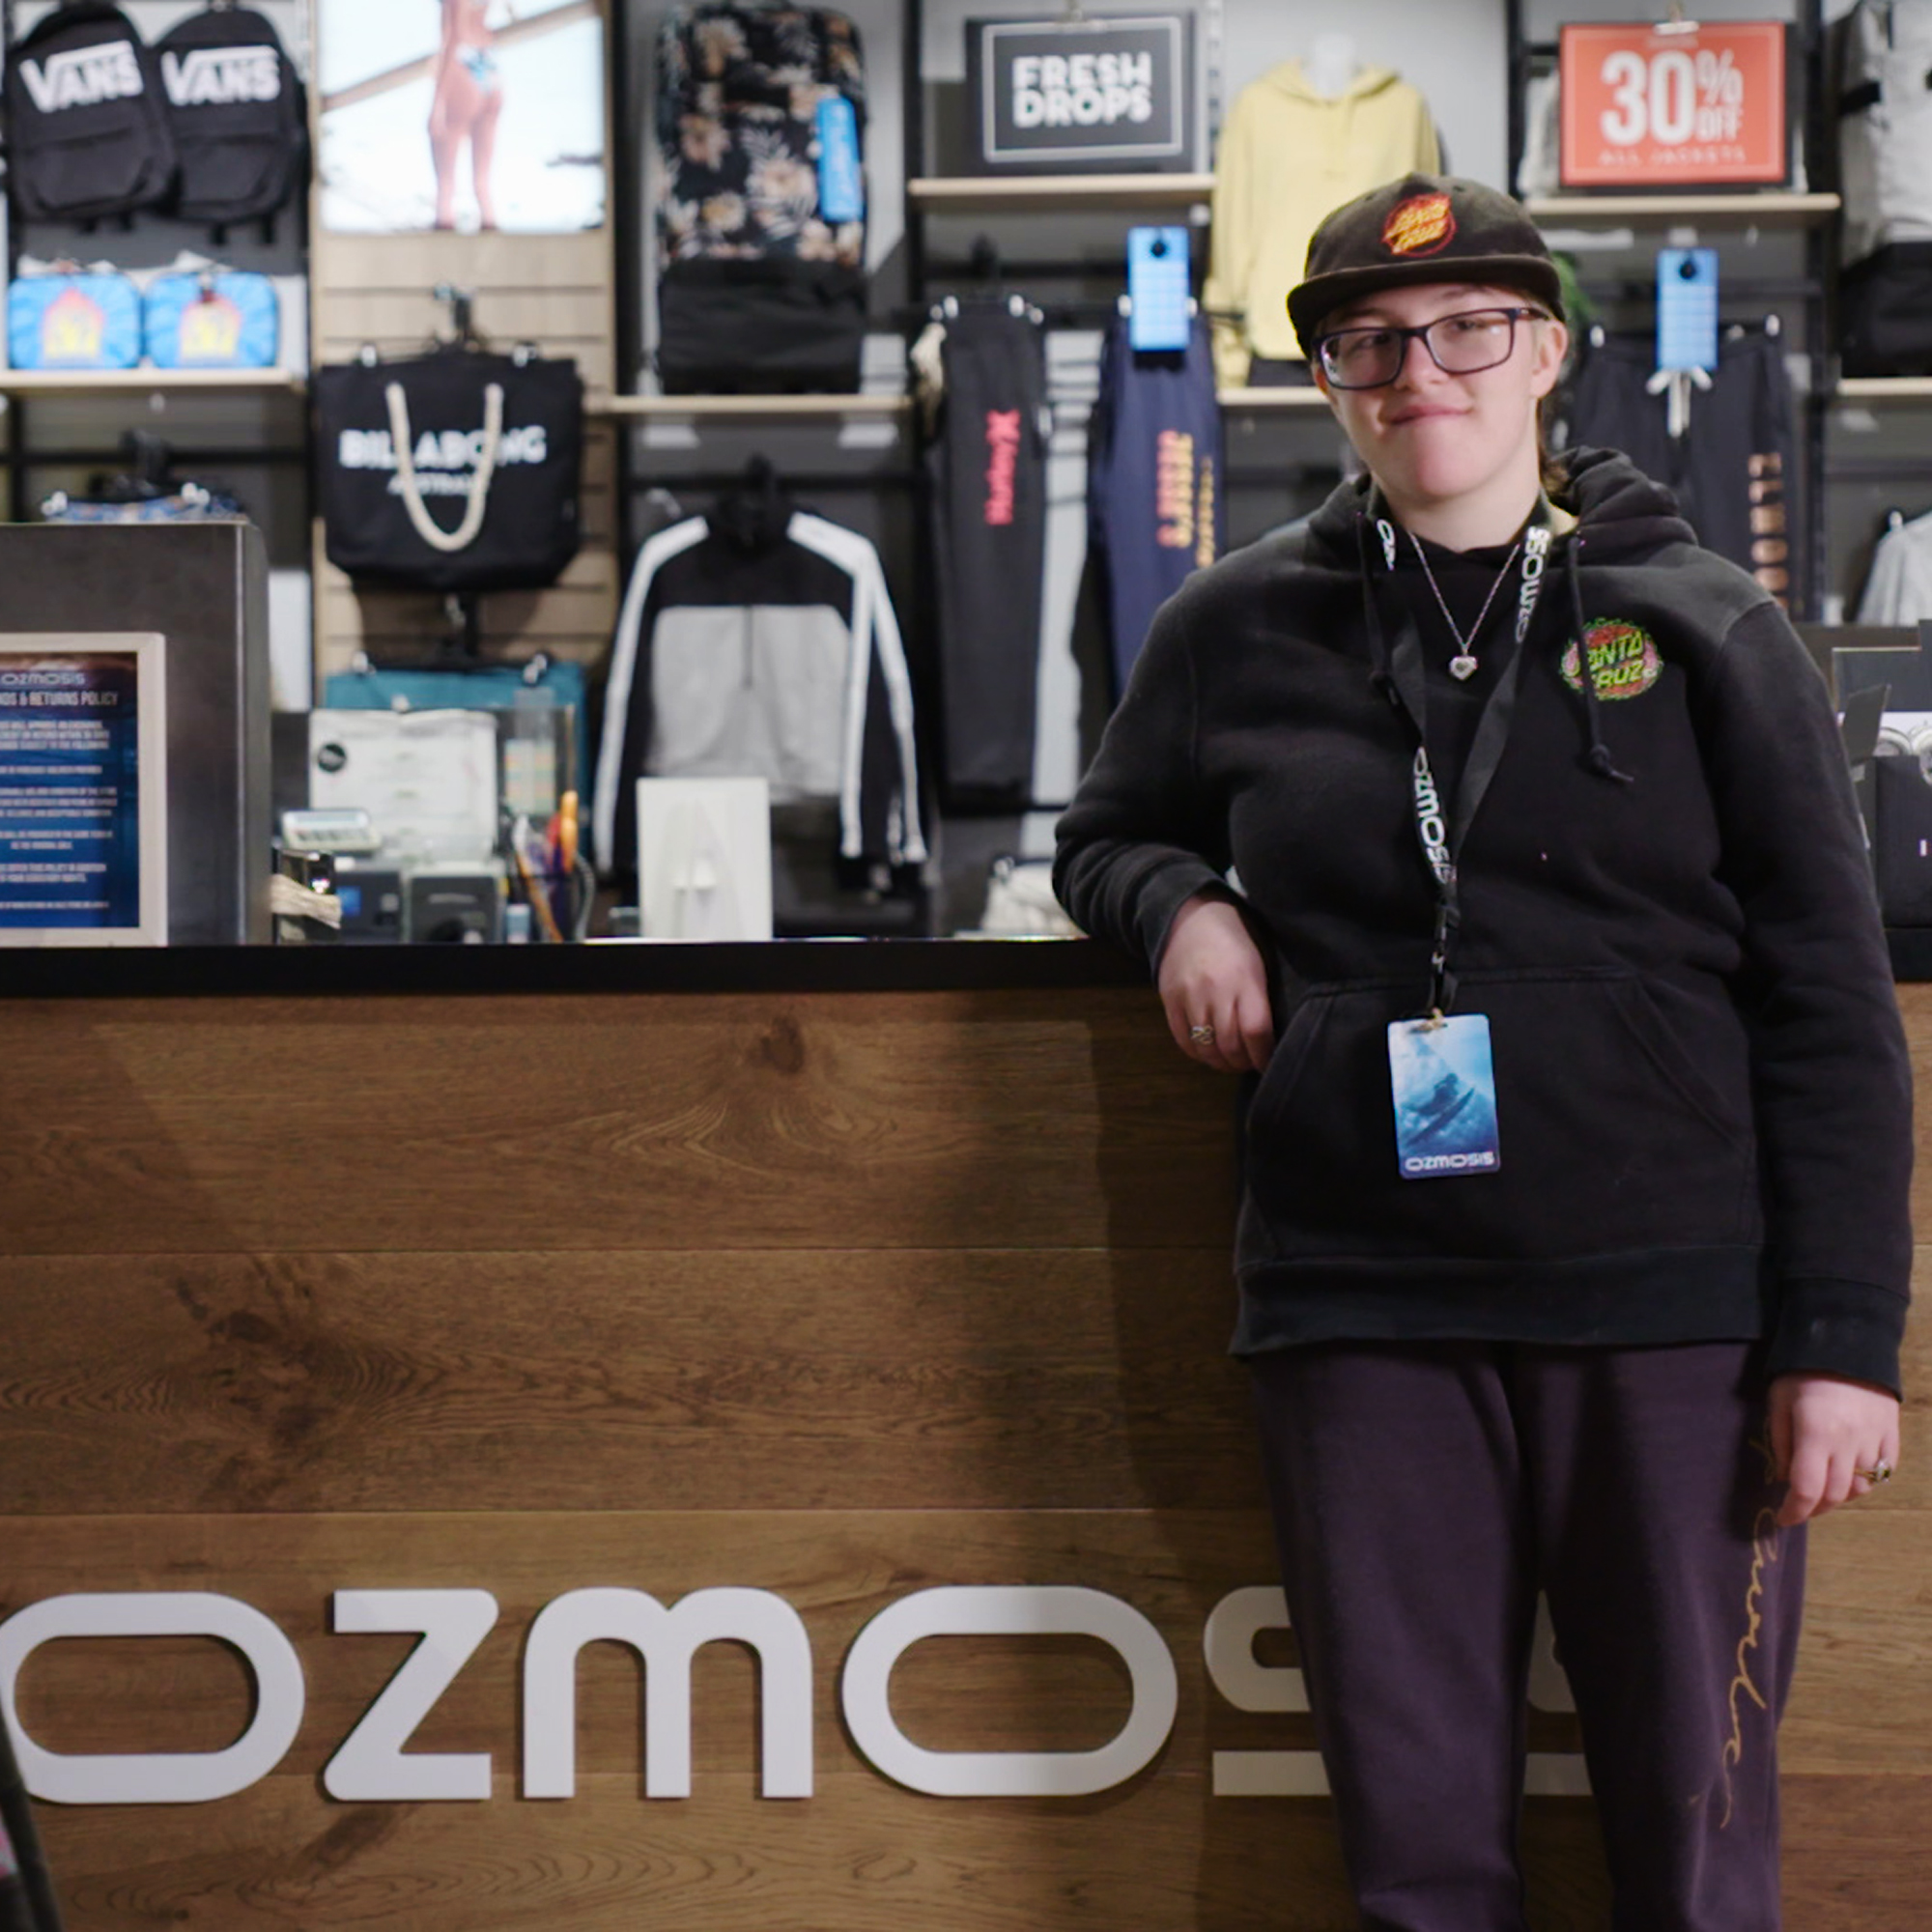 Danielle leaning on Ozmosis counter, wearing ozmosis clothes and has a lanyard around neck